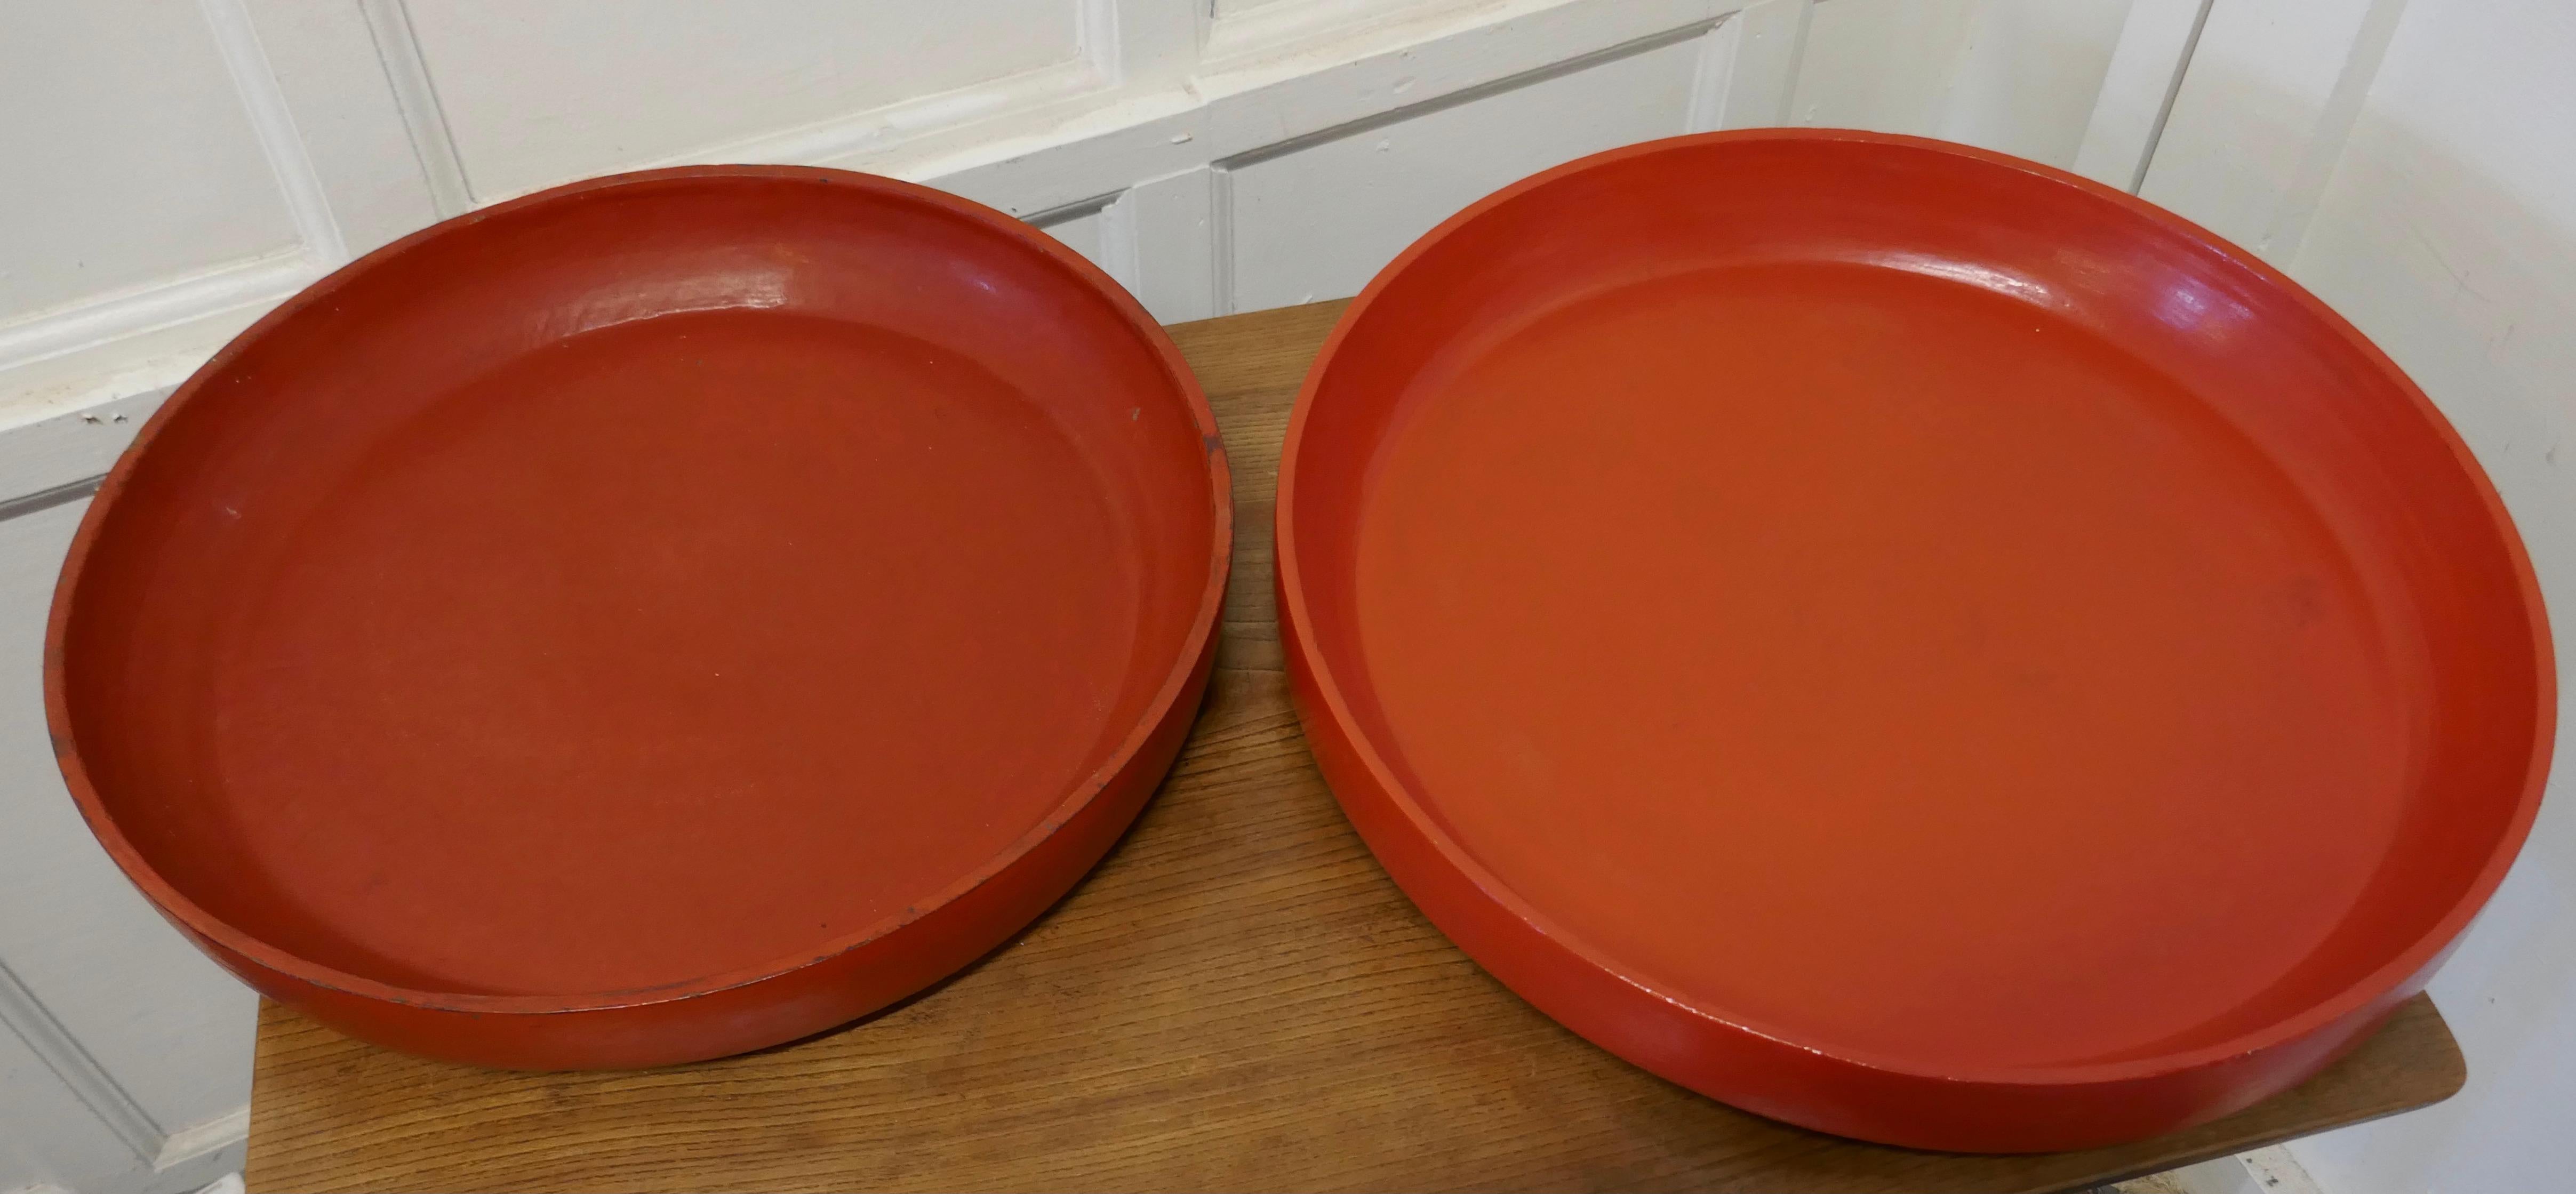 A Pair of North African Folk Art Hand Made Red Ochre Dishes

2 Lovely Large Dishes, brightly painted in Red Ochre, the dishes are each hand turned from one piece of wood

The painted finish is hard and very durable 
The largest dish is 21” in